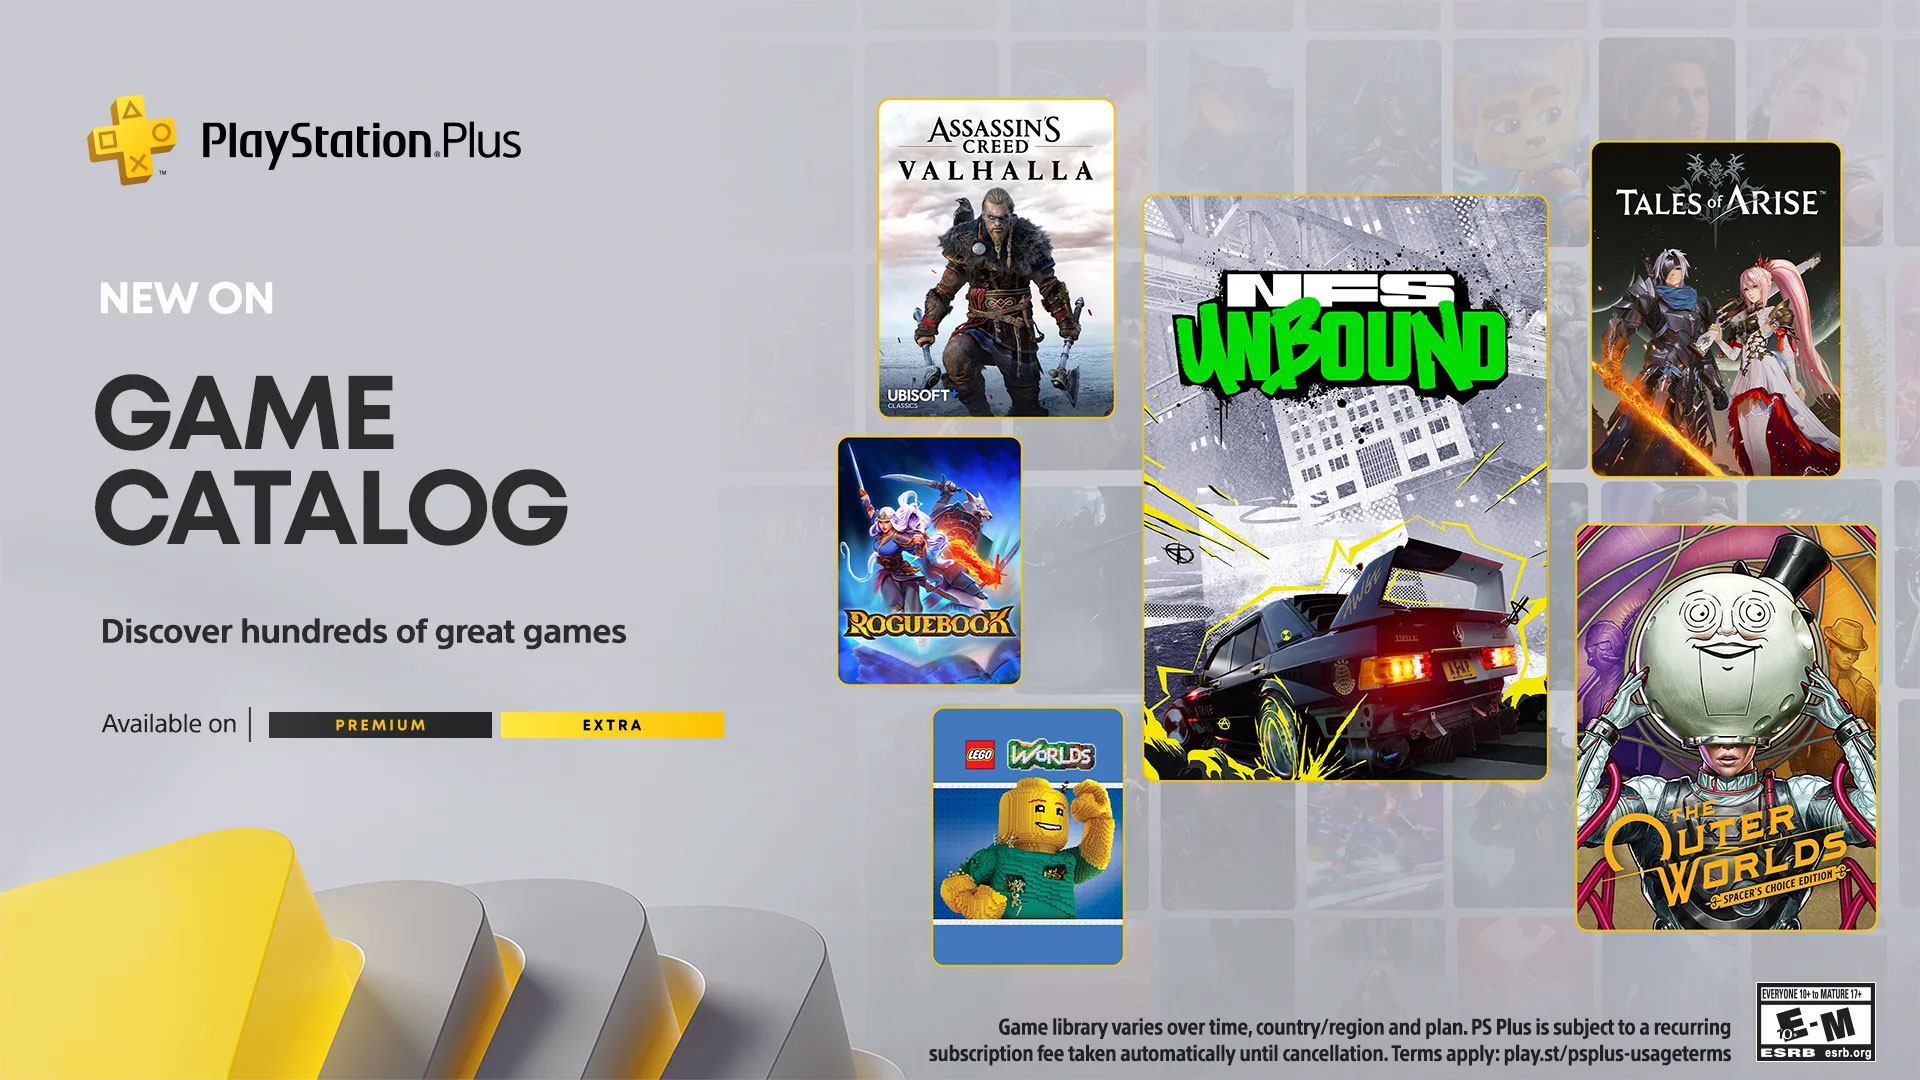 The PlayStation Plus Game Catalog additions for February will be available starting February 20